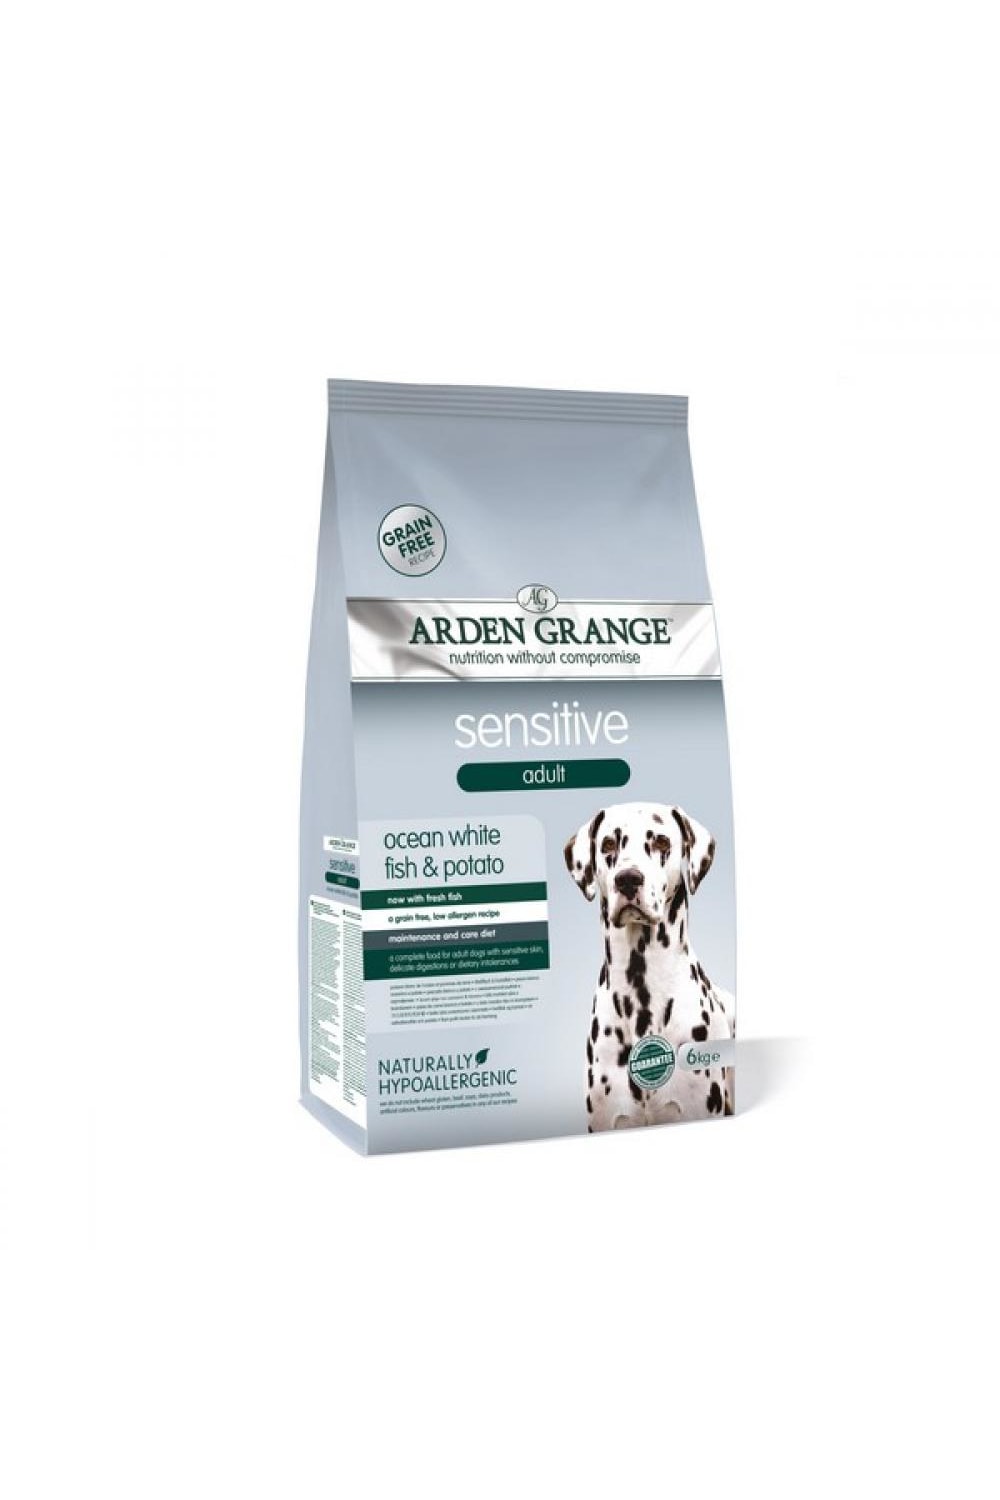 Arden Grange Sensitive Adult Ocean White Fish And Potato Complete Dry Dog Food (May Vary) (4.4lb)